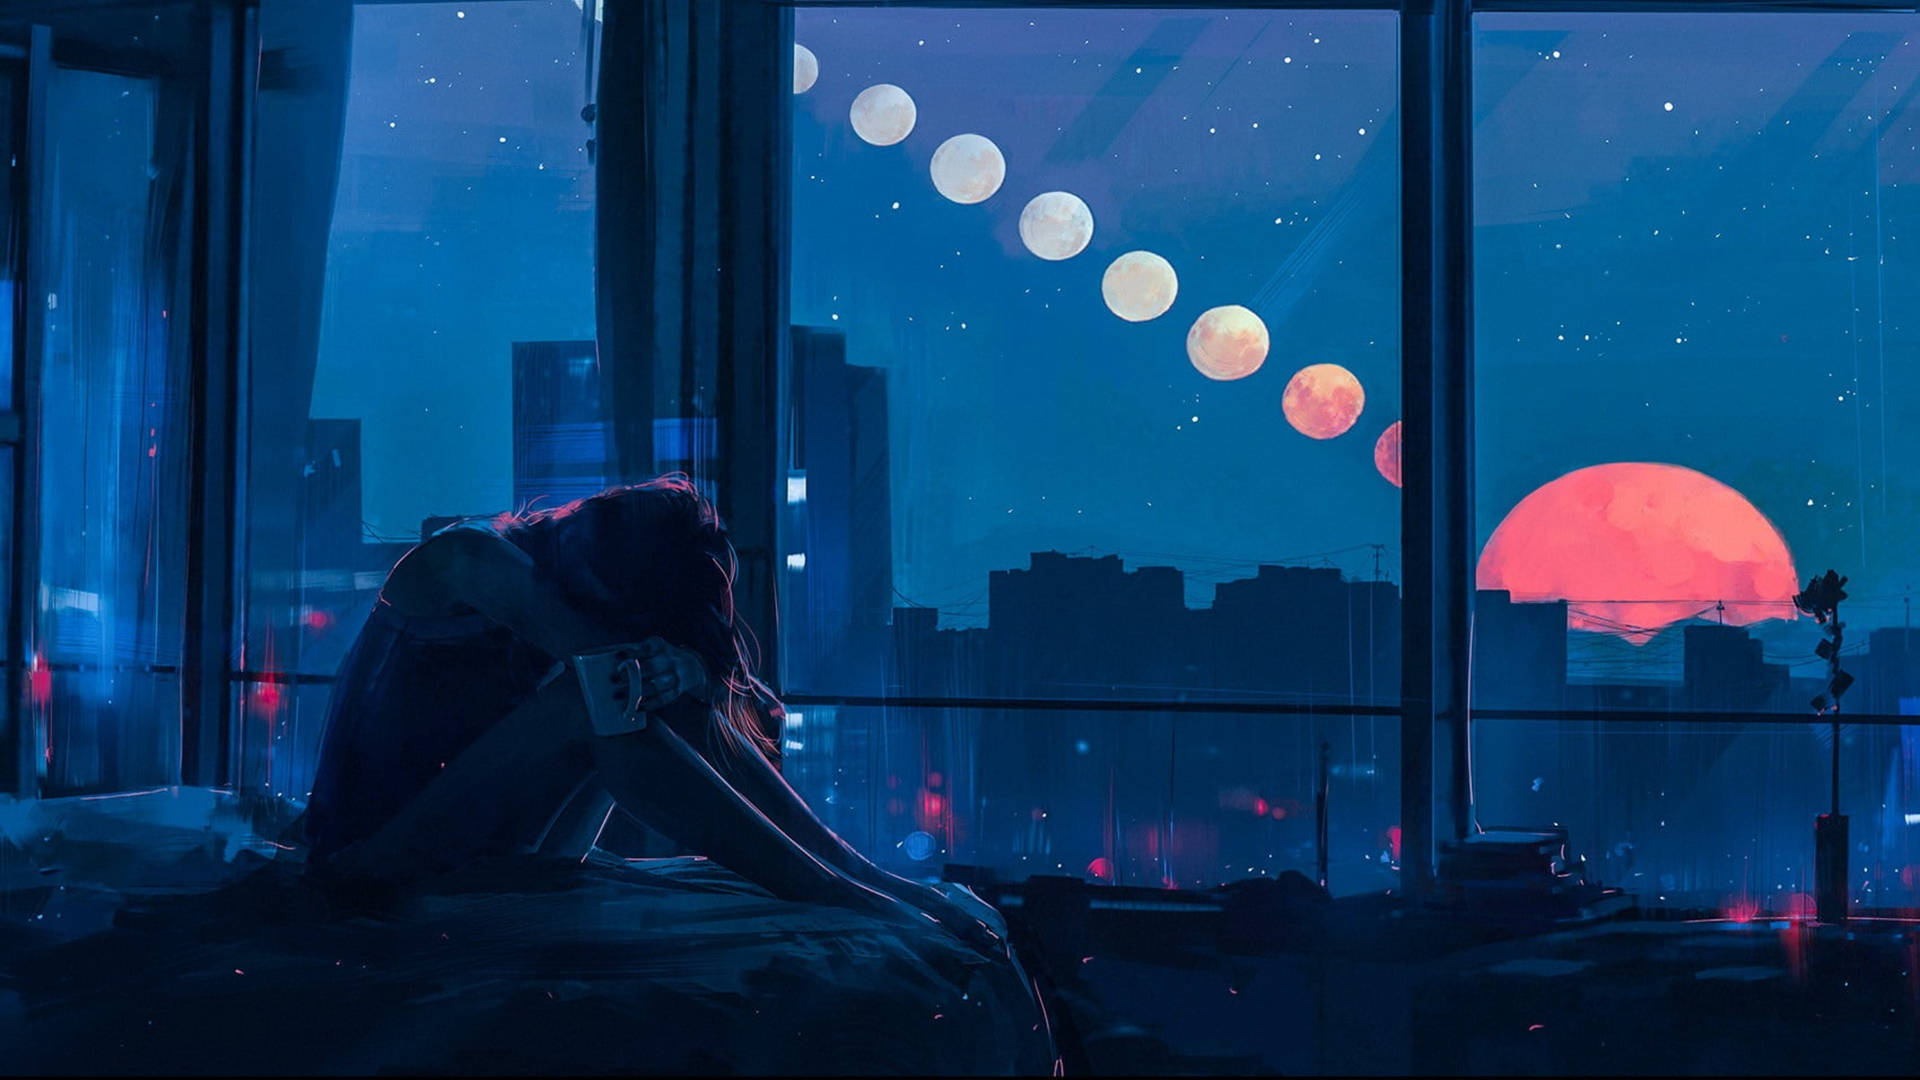 Feeling Alone Bedroom At Night Background